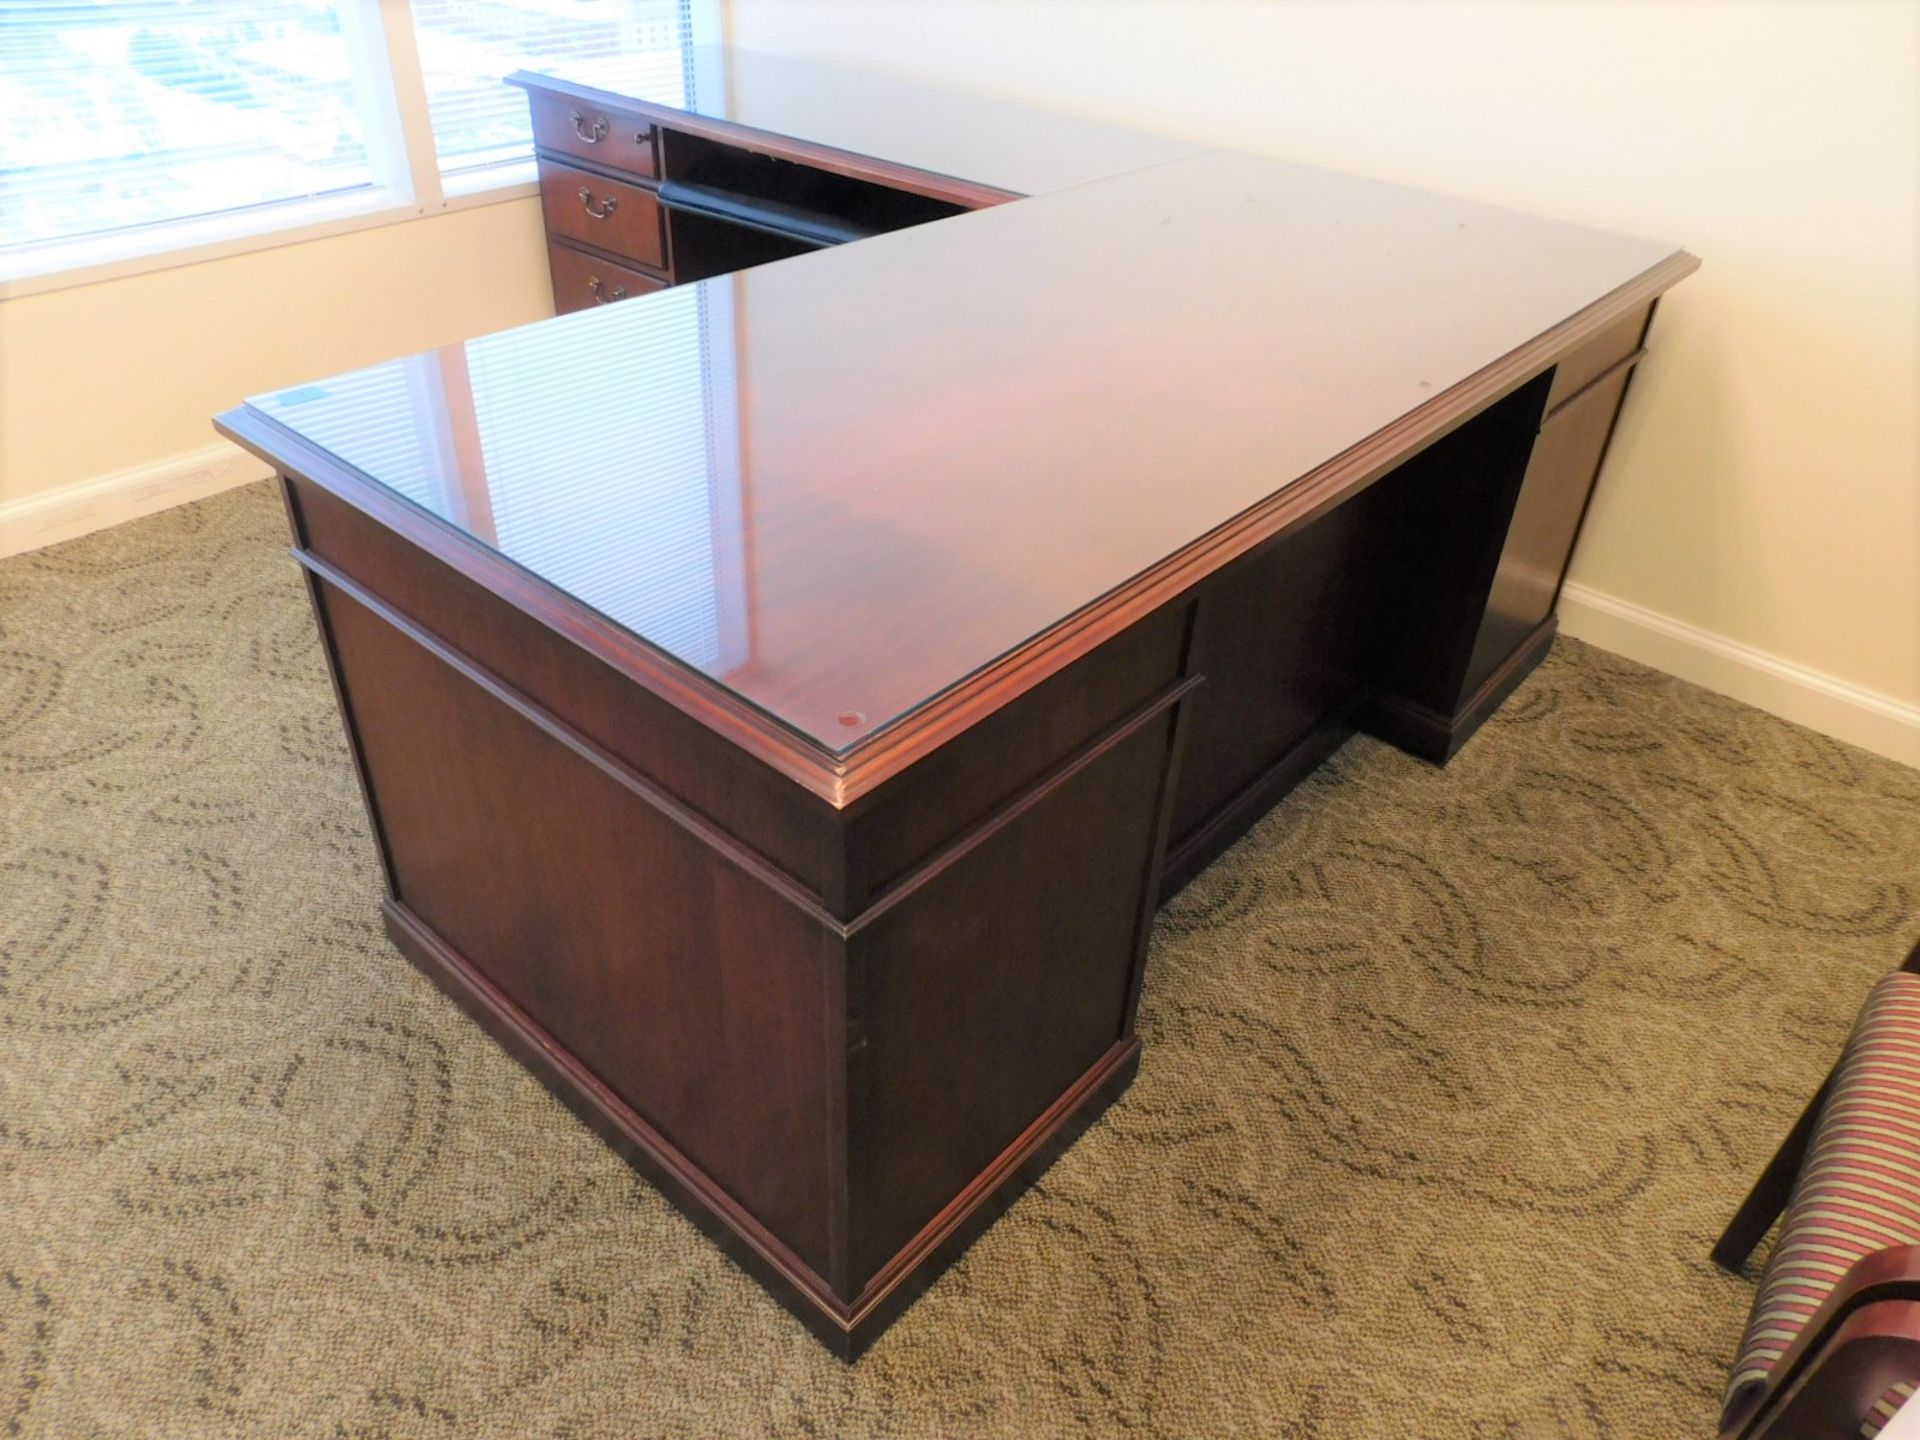 KIMBALL SENATOR SERIES 36" X 72" EXECUTIVE L DESK W/ LEFT 54" EXTENSION, FIXED CENTER DRAWER, - Image 3 of 3